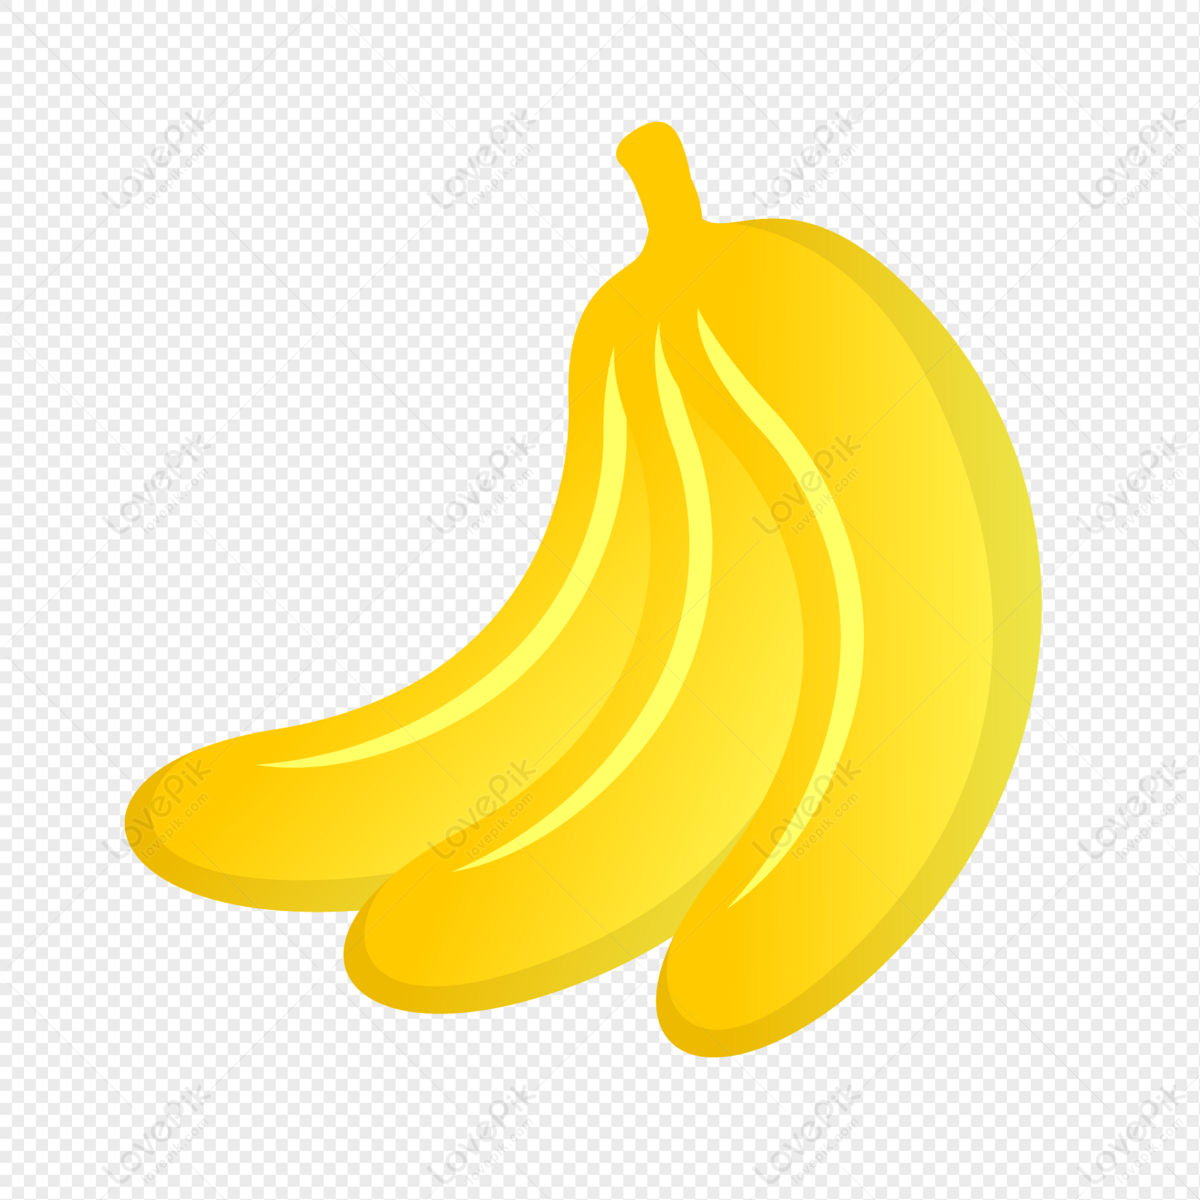 Banana Free PNG And Clipart Image For Free Download - Lovepik | 401384049